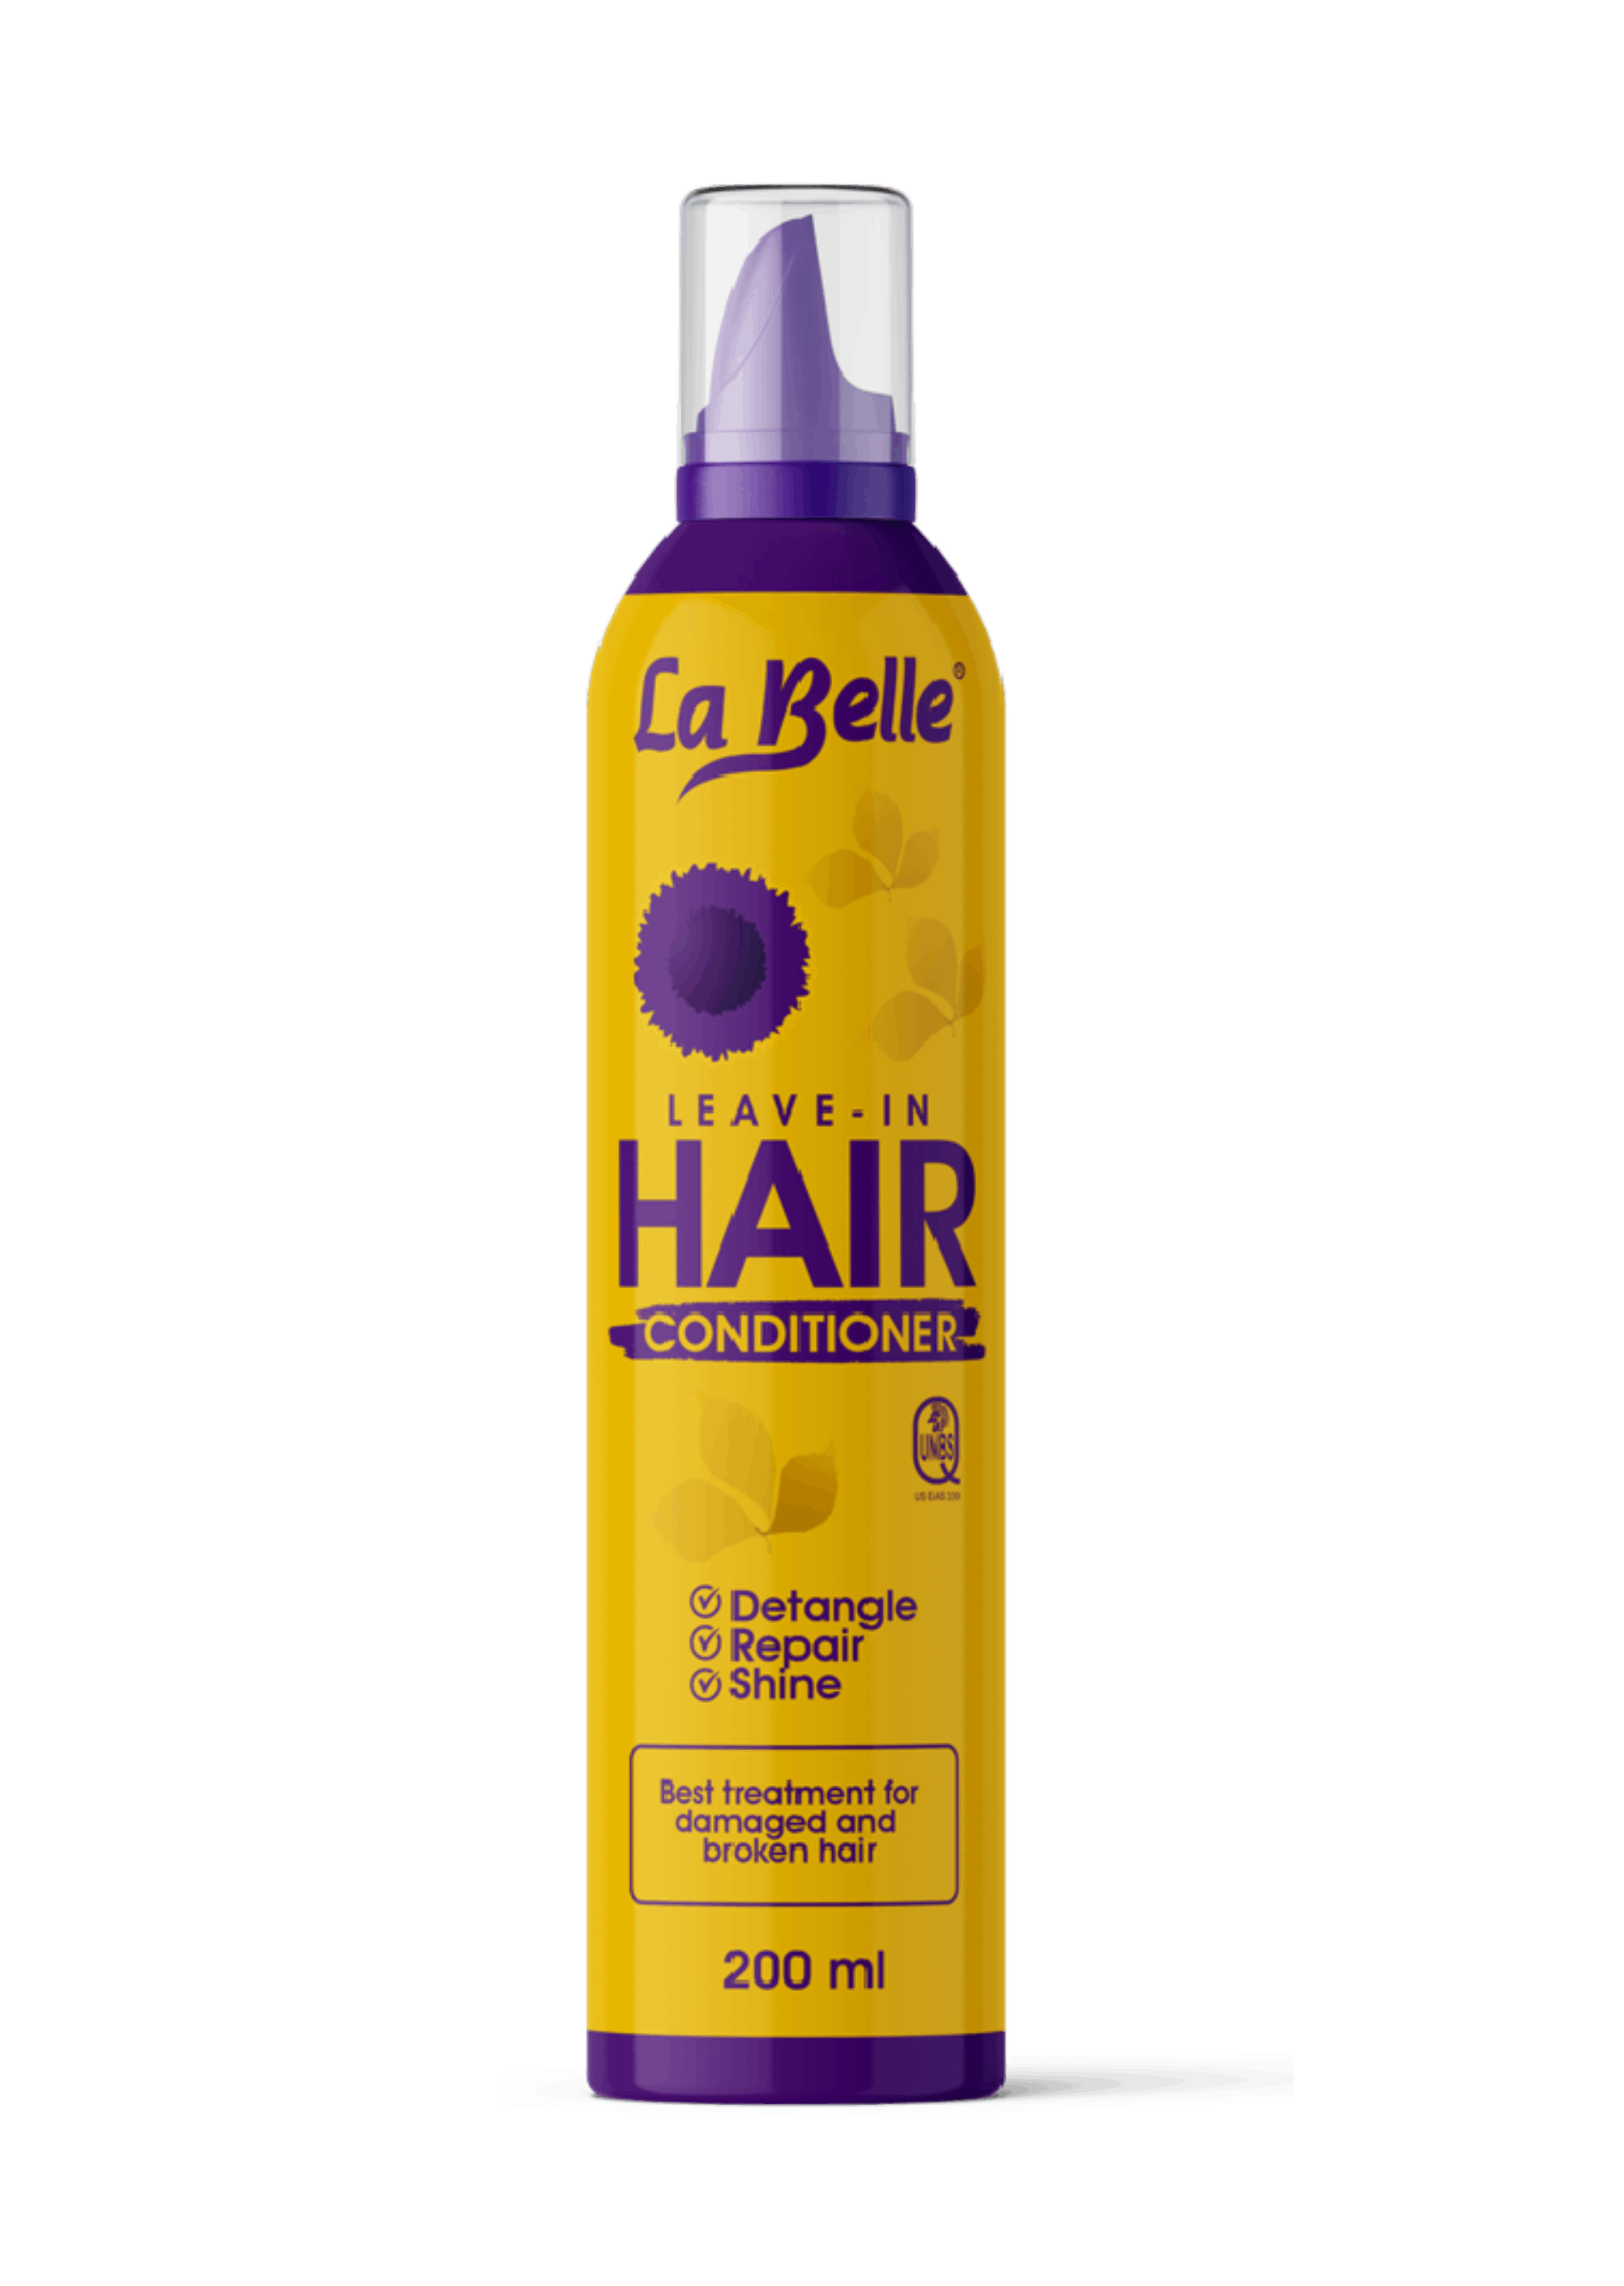 Leave-in hair conditioner